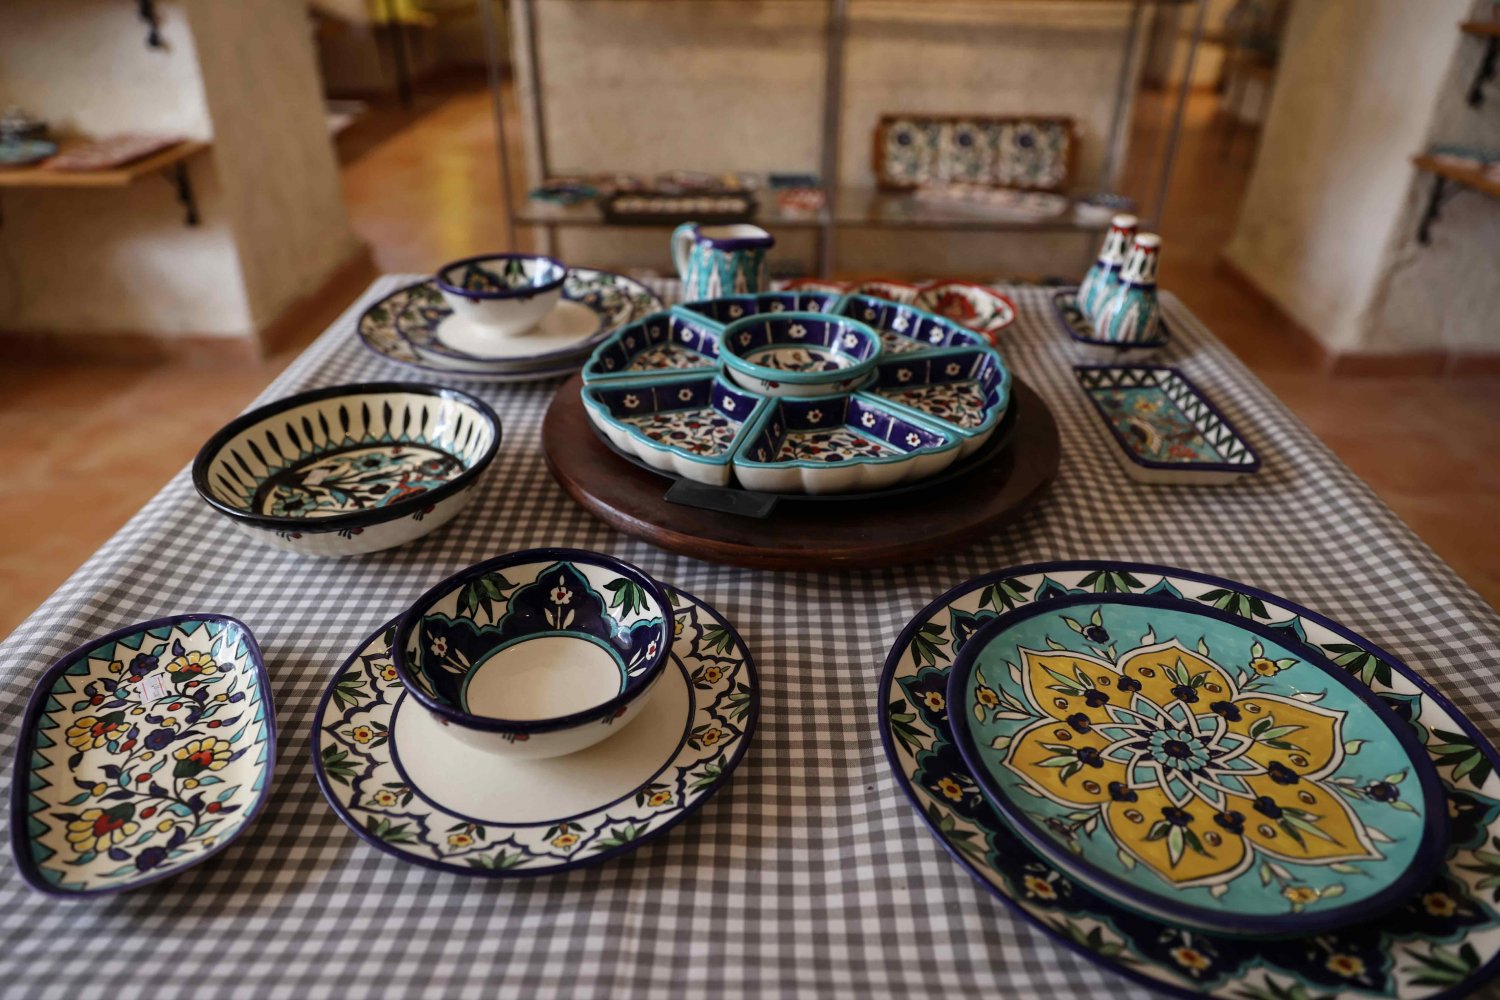 Finished hand-painted Armenian ceramic art pieces on display in the Balian shop in East Jerusalem 